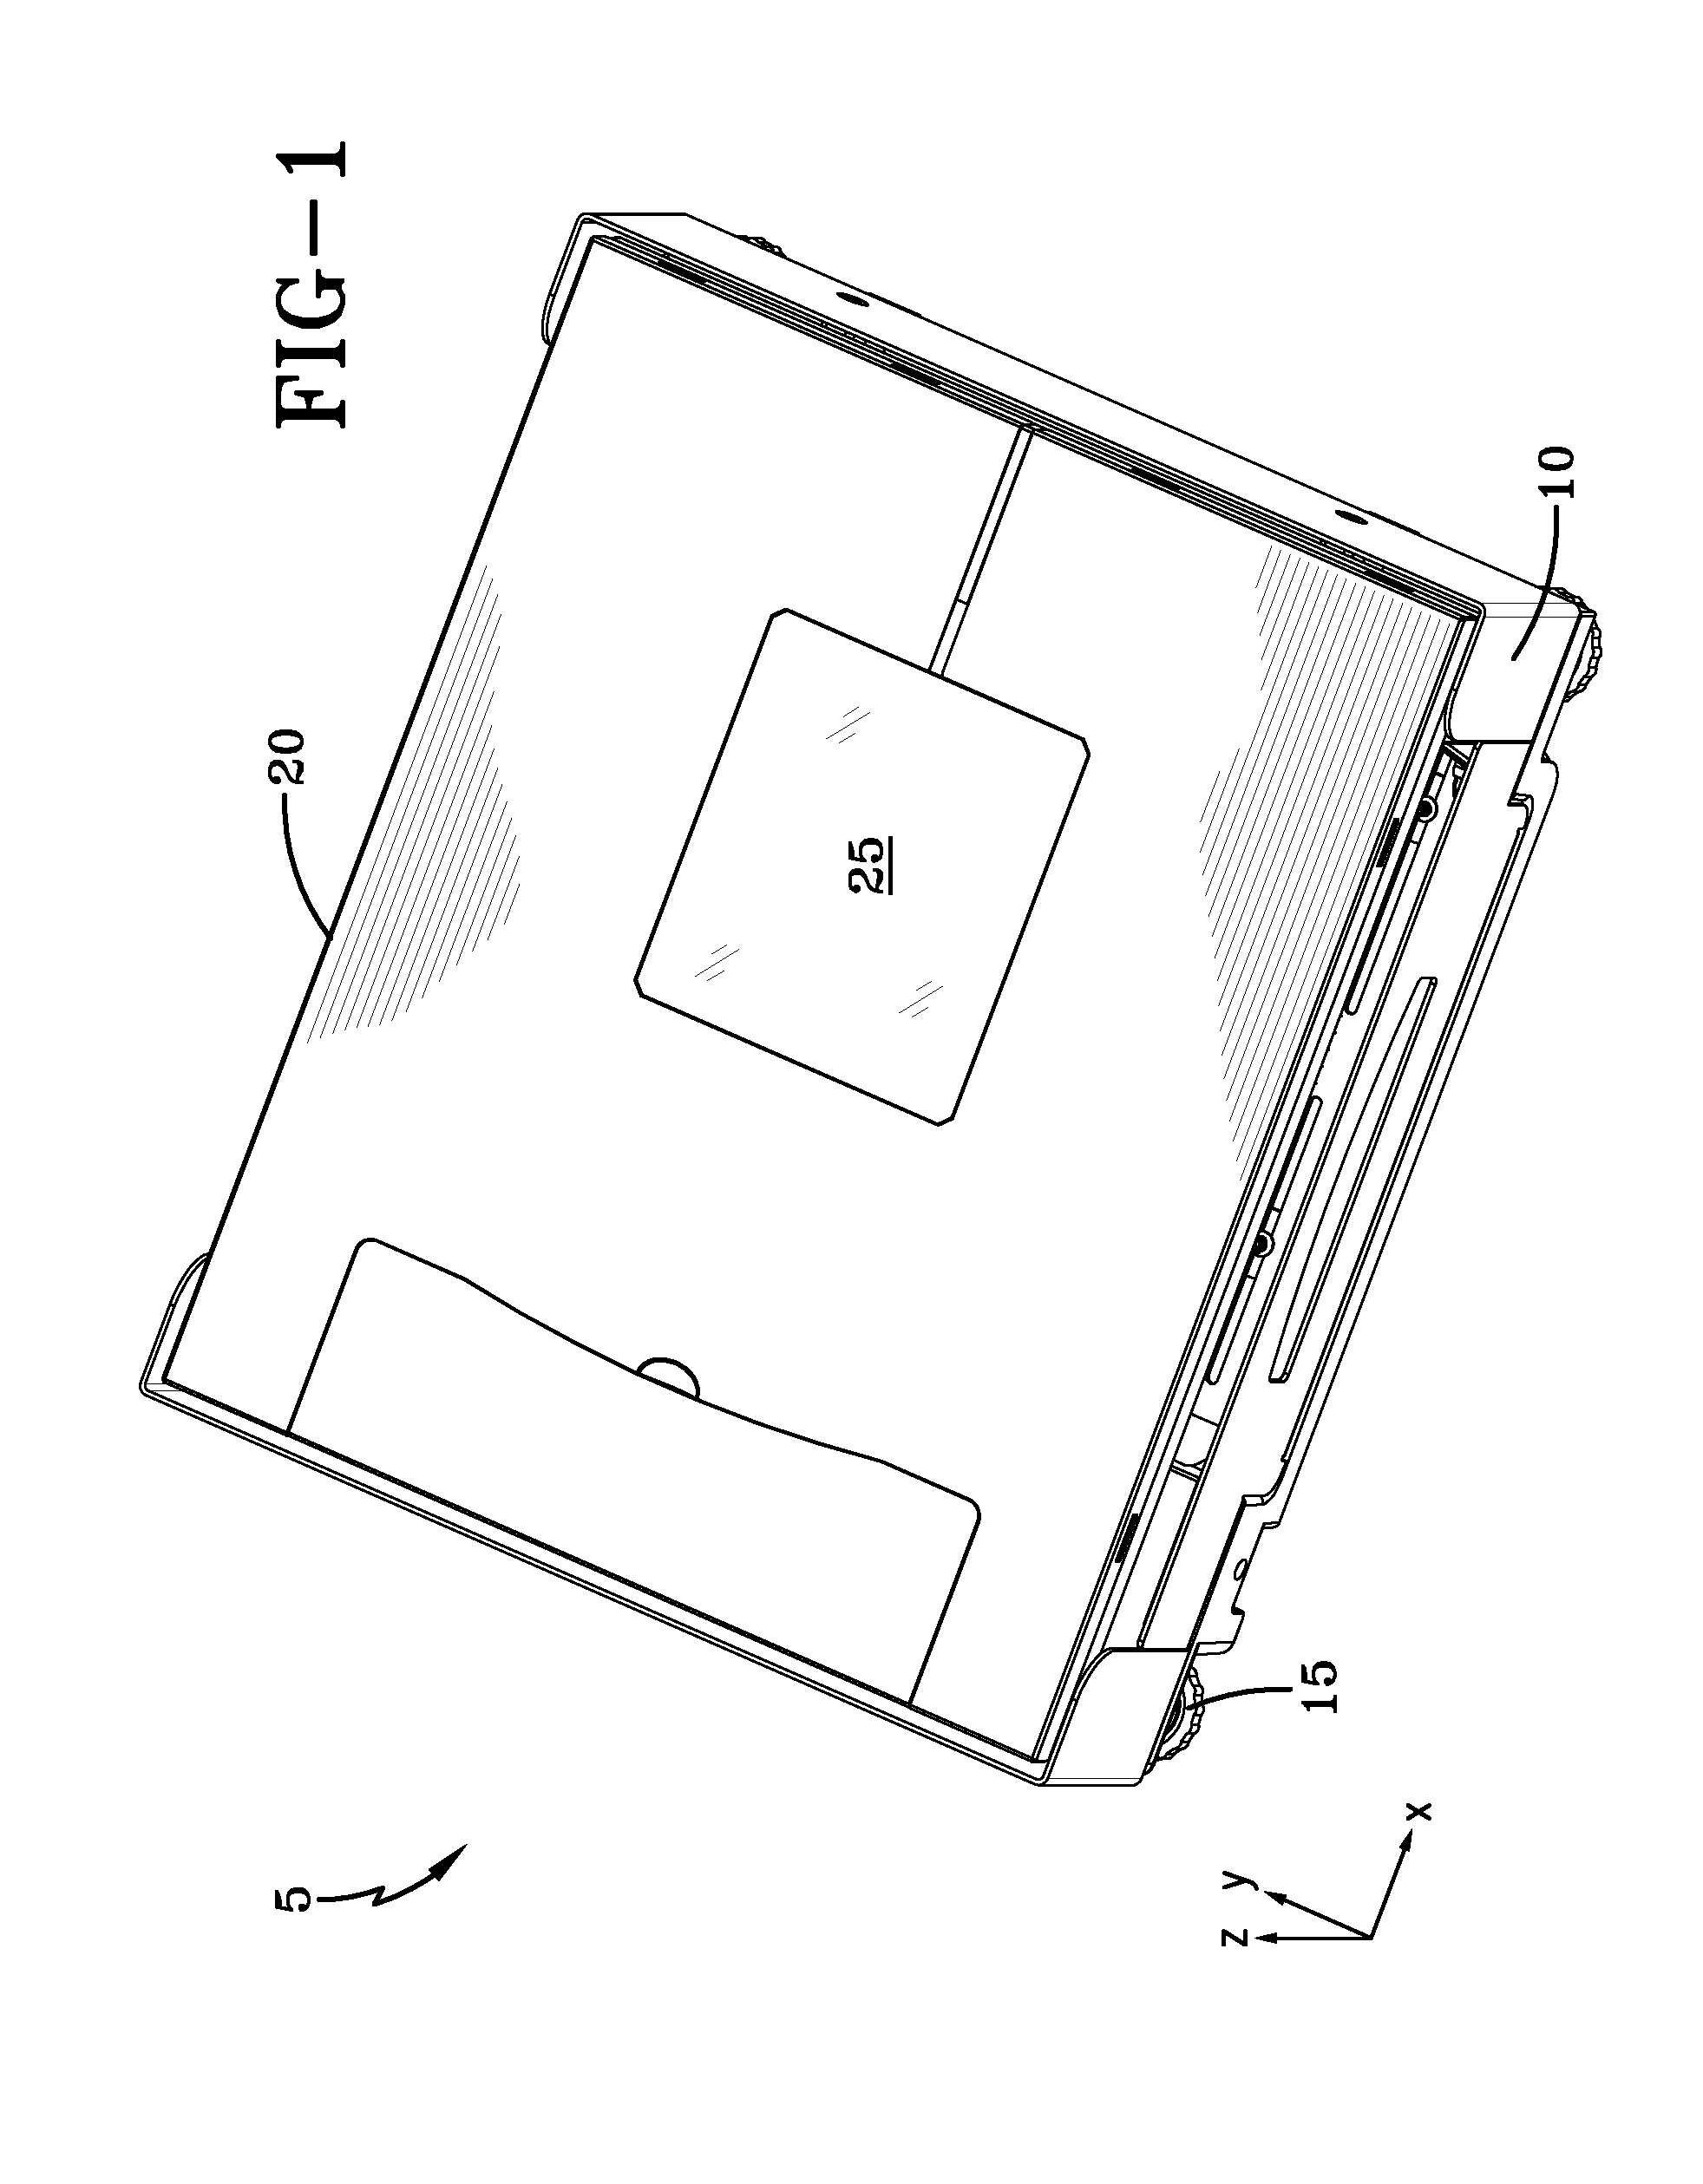 Adjustable scanner mounting assembly and method